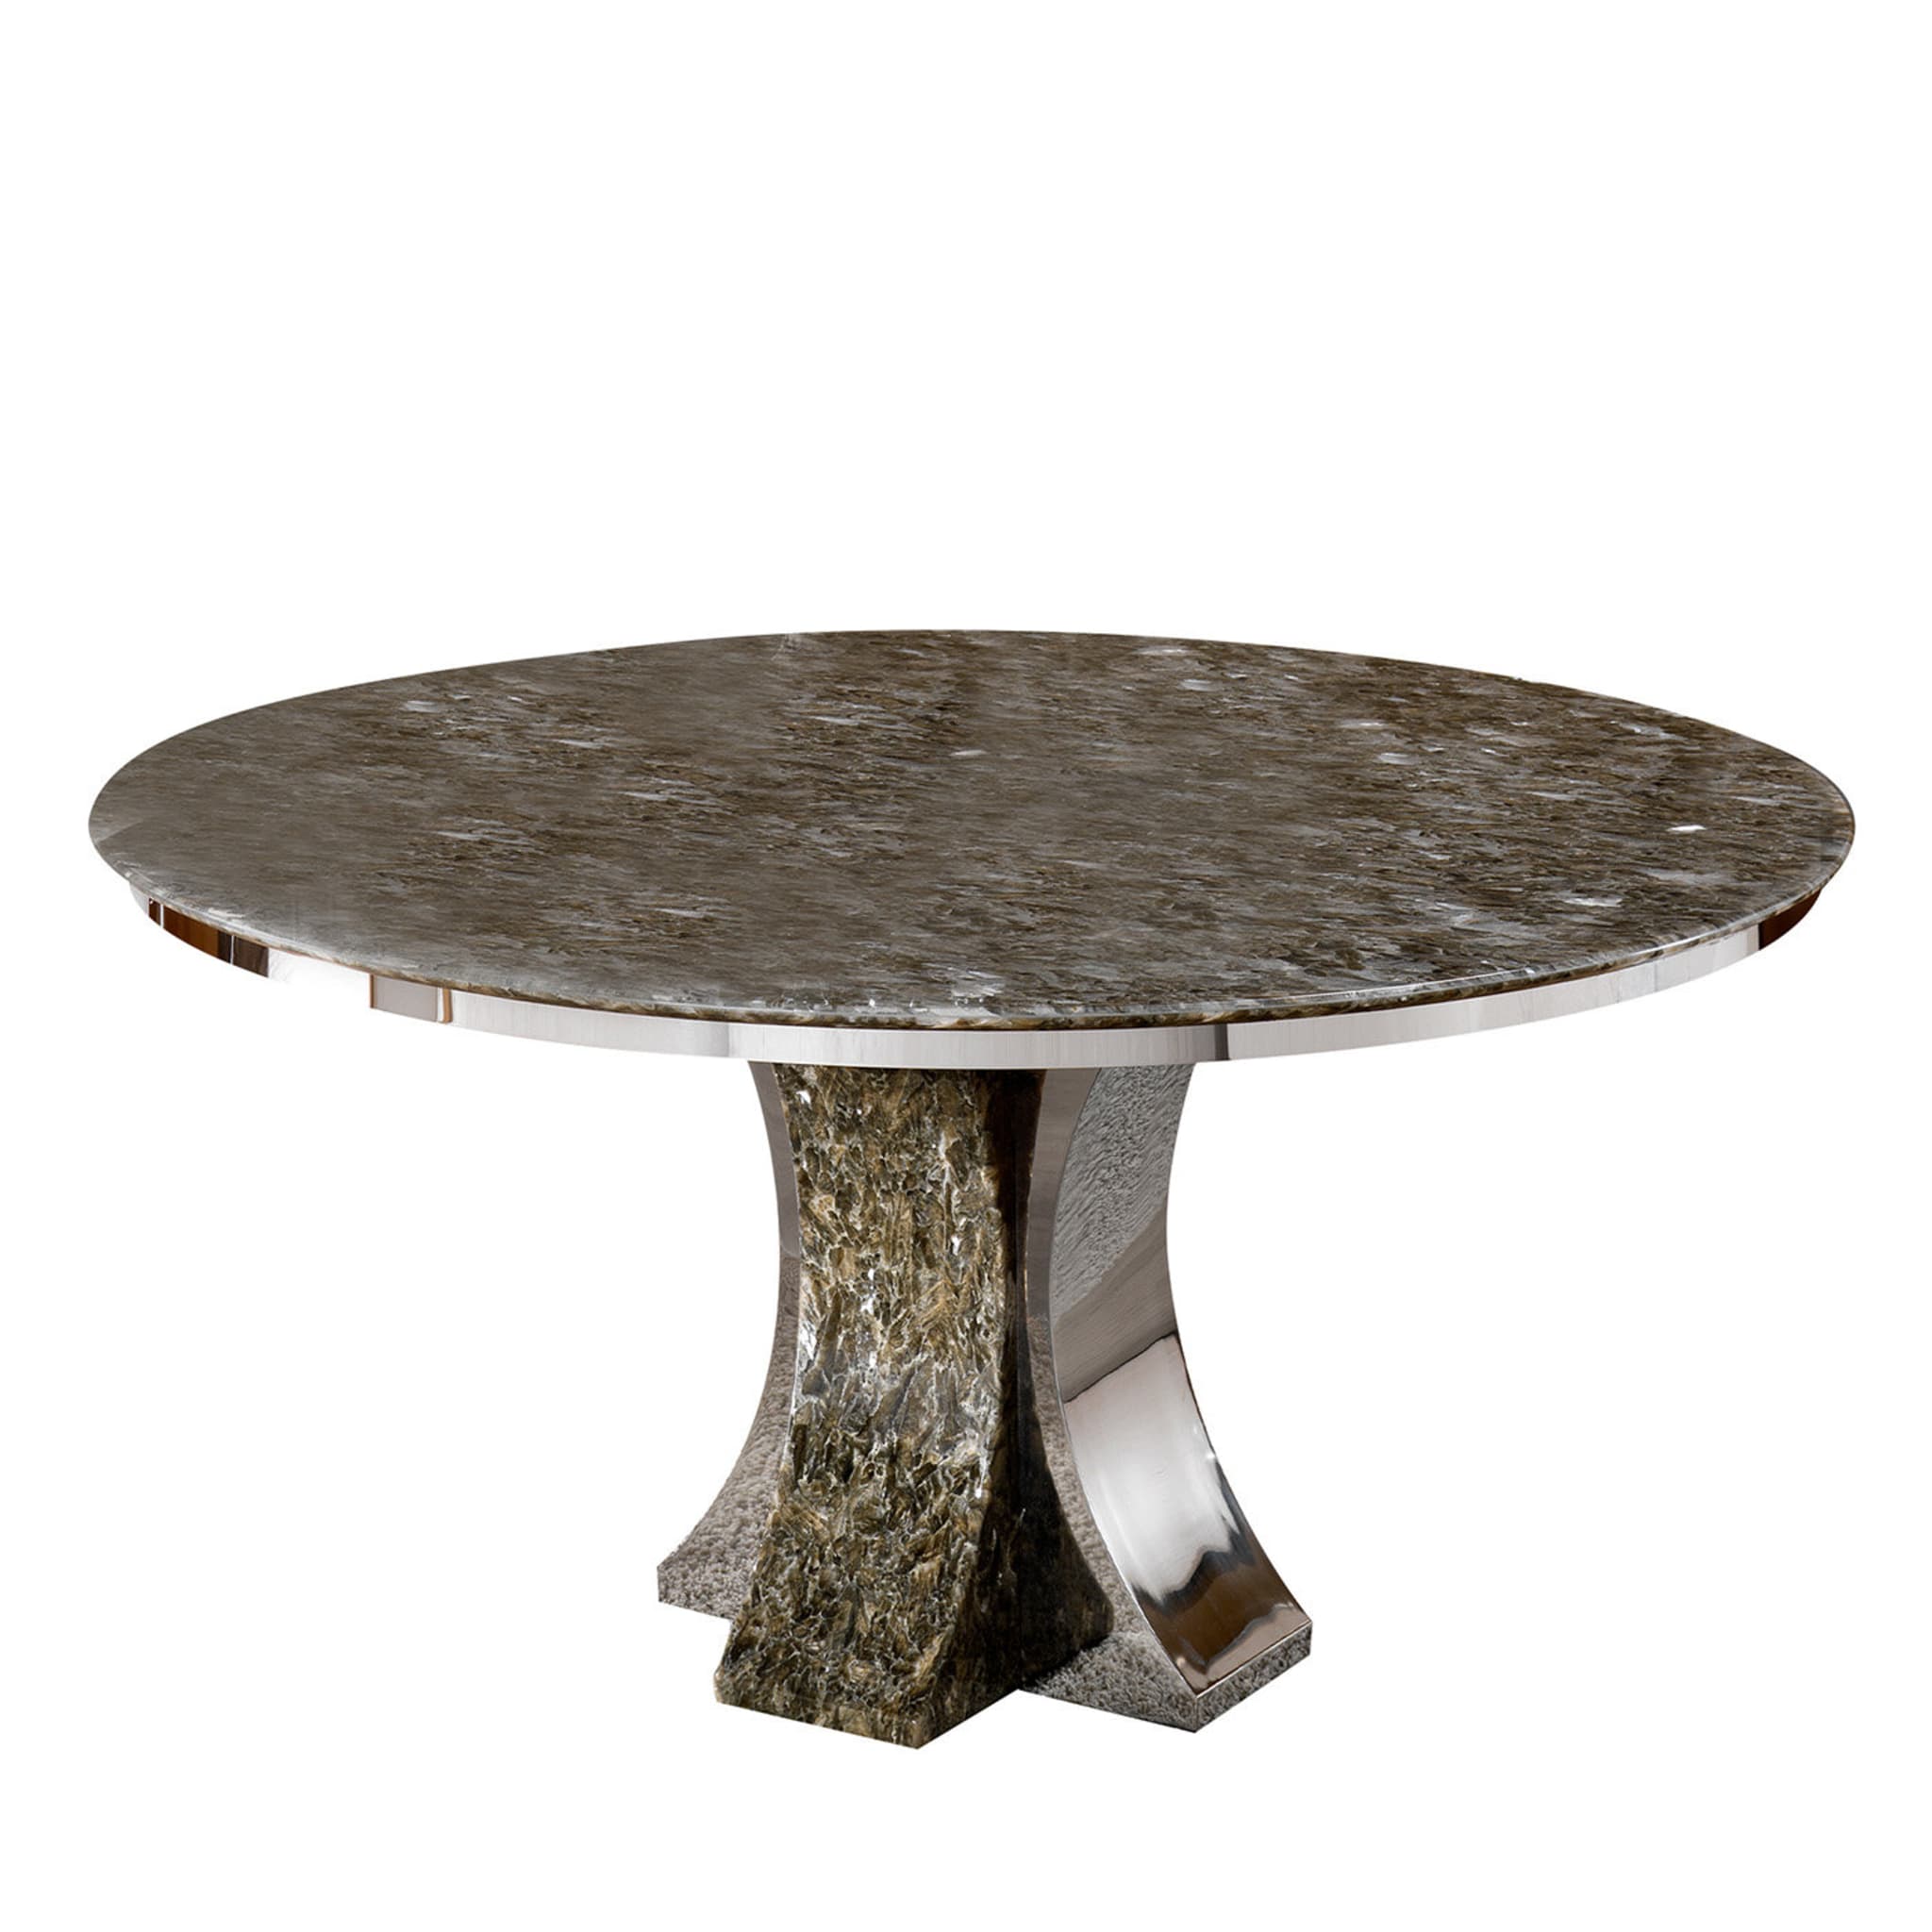 Parenthesis Round Dining Table - Main view